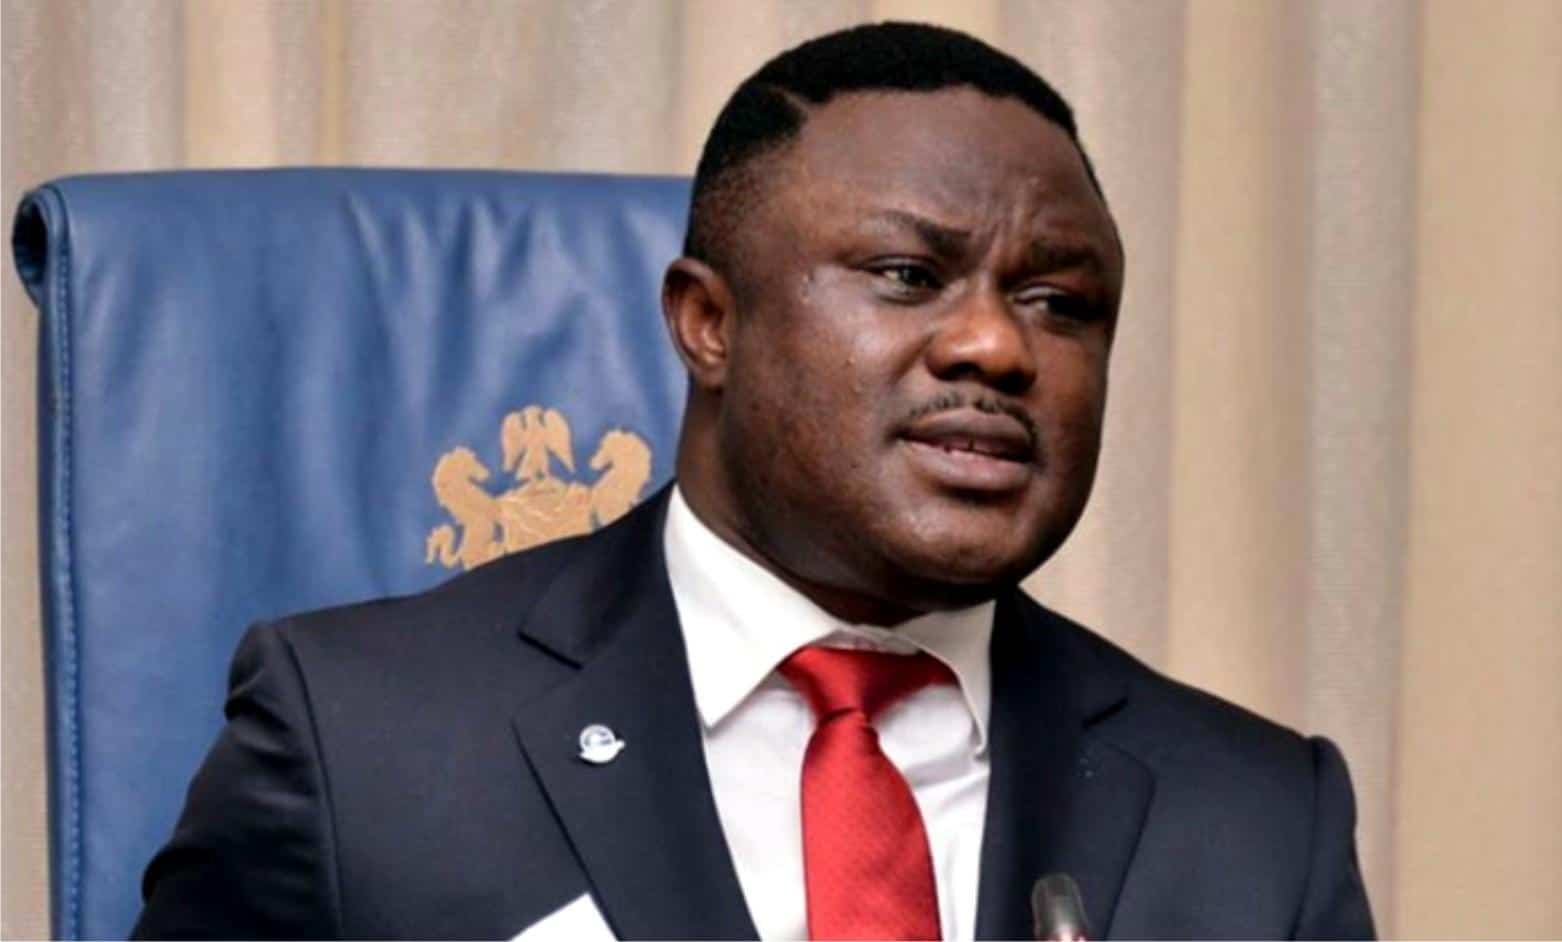 But for Buhari, insecurity in Nigeria would've been worse —Gov Ayade